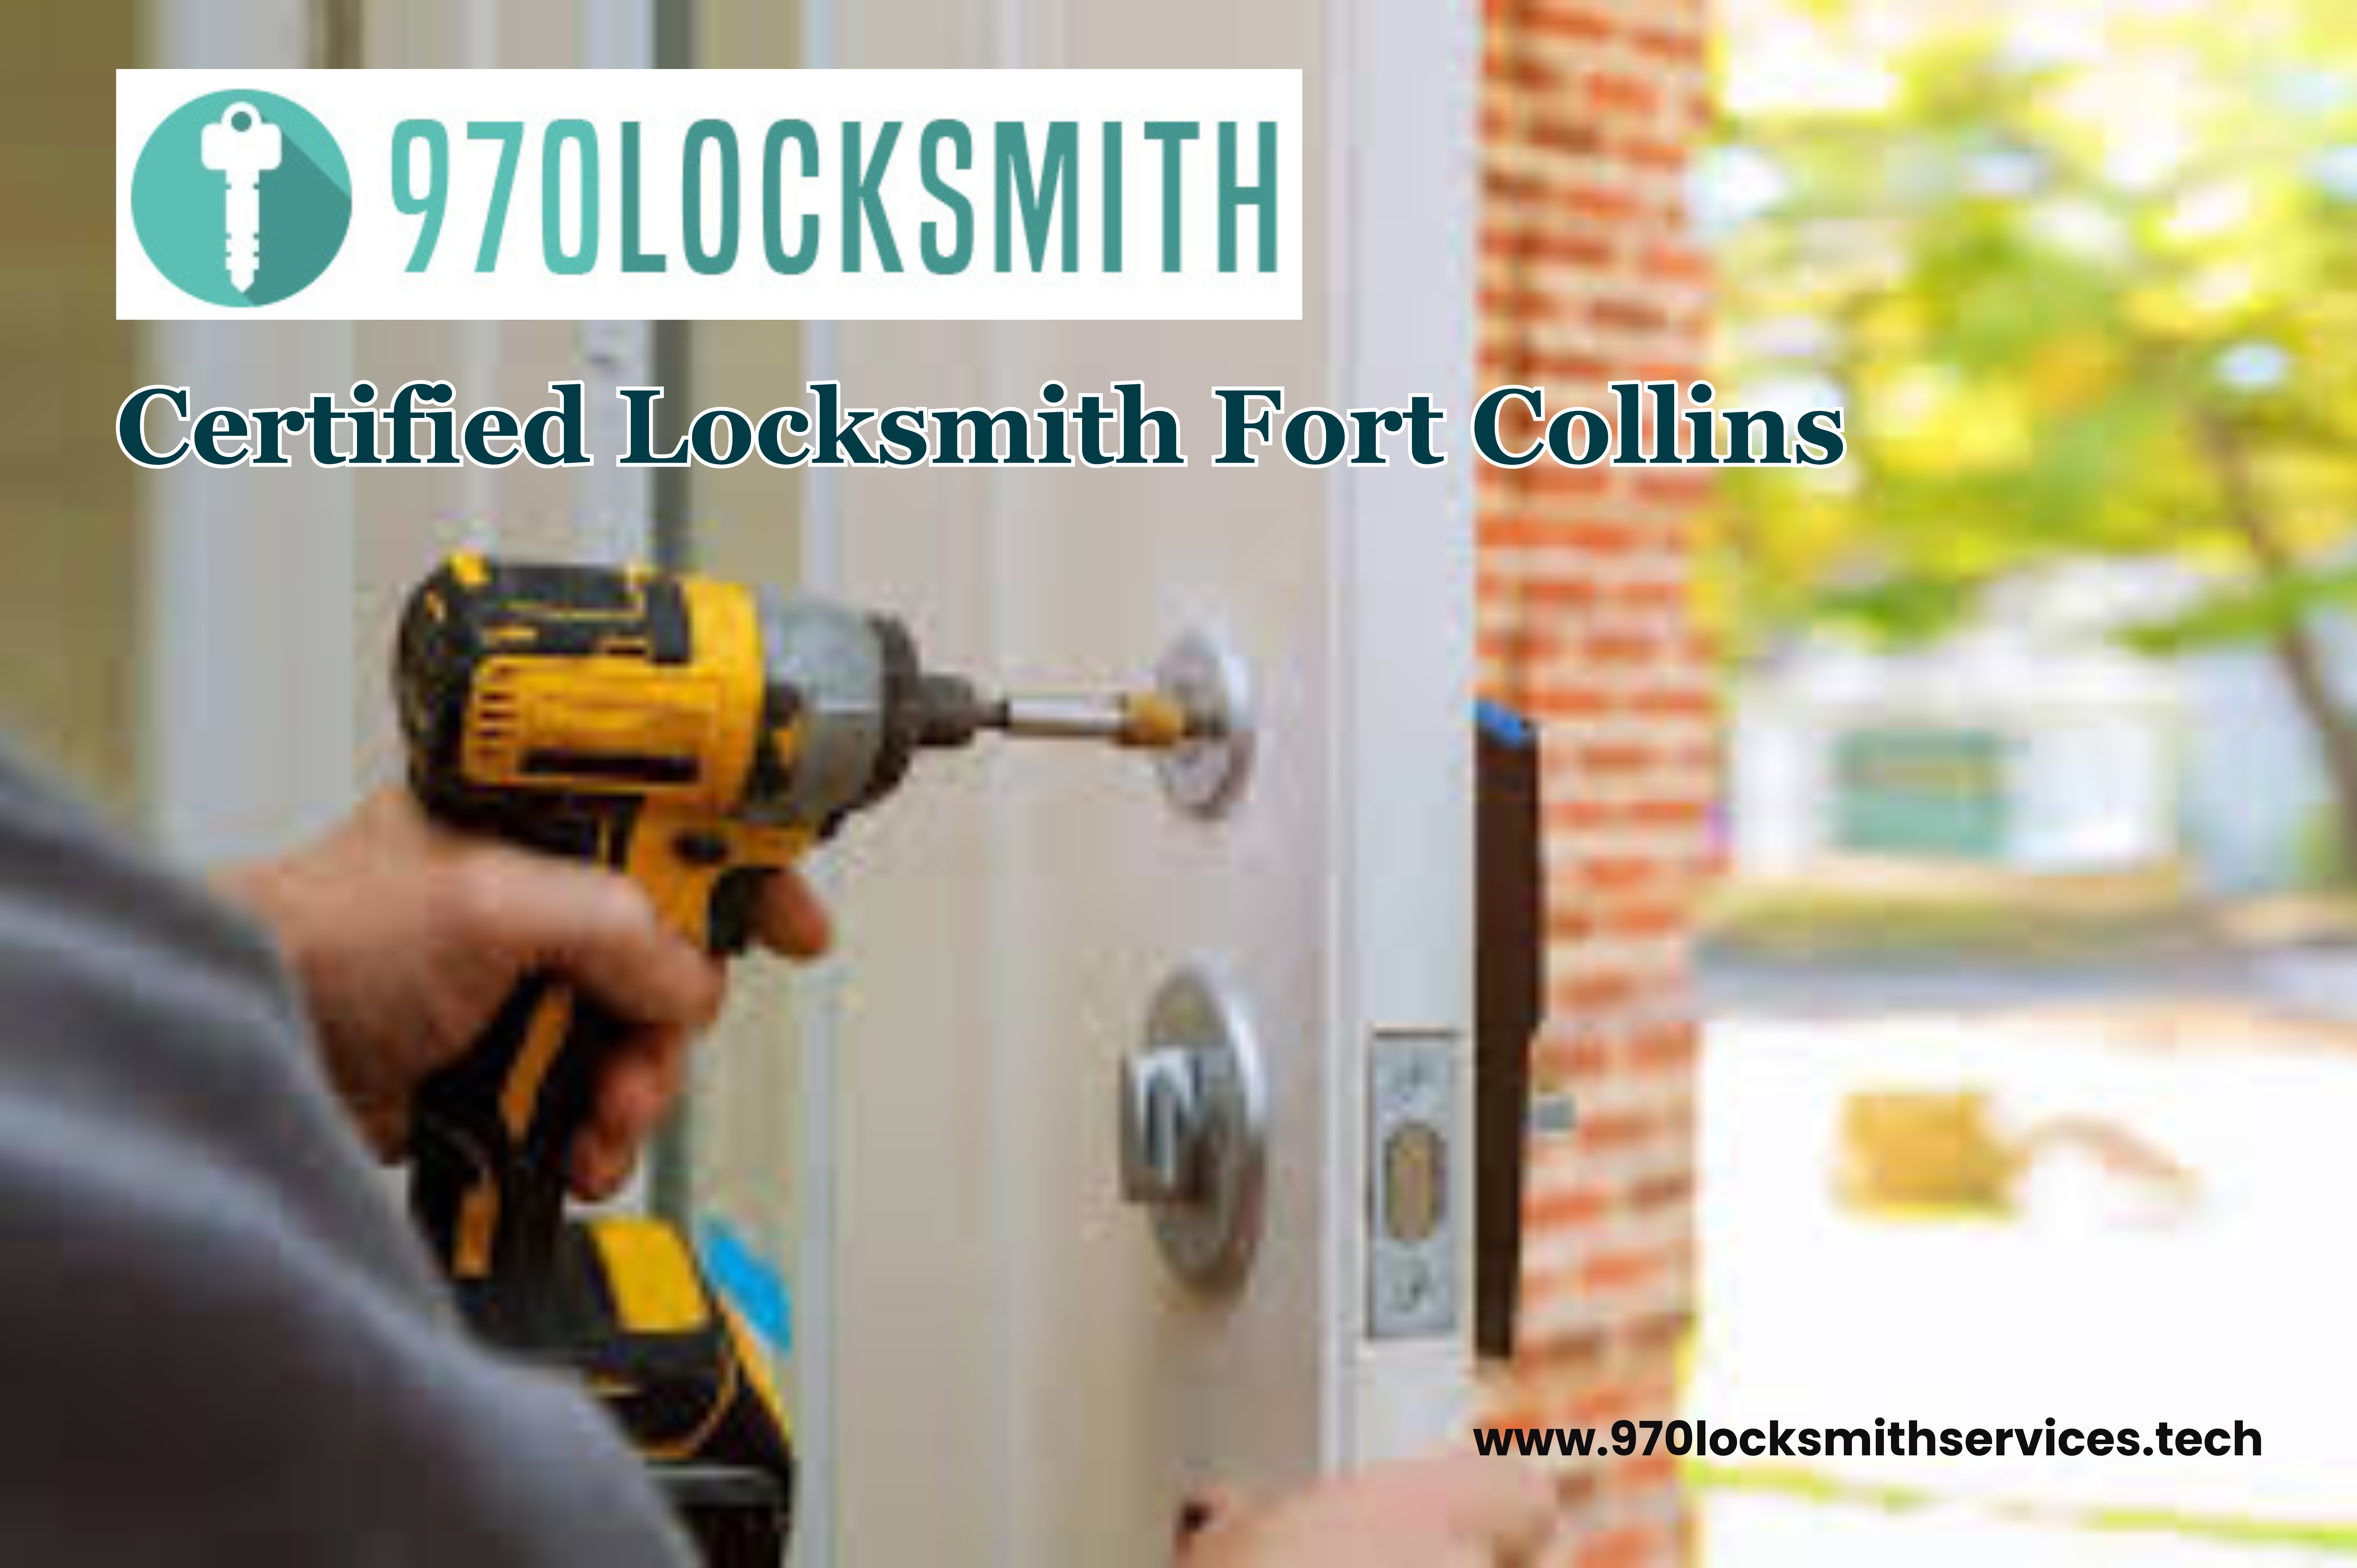 970 Locksmith – Fort Collins Introduces Comprehensive Certified Locksmith Services